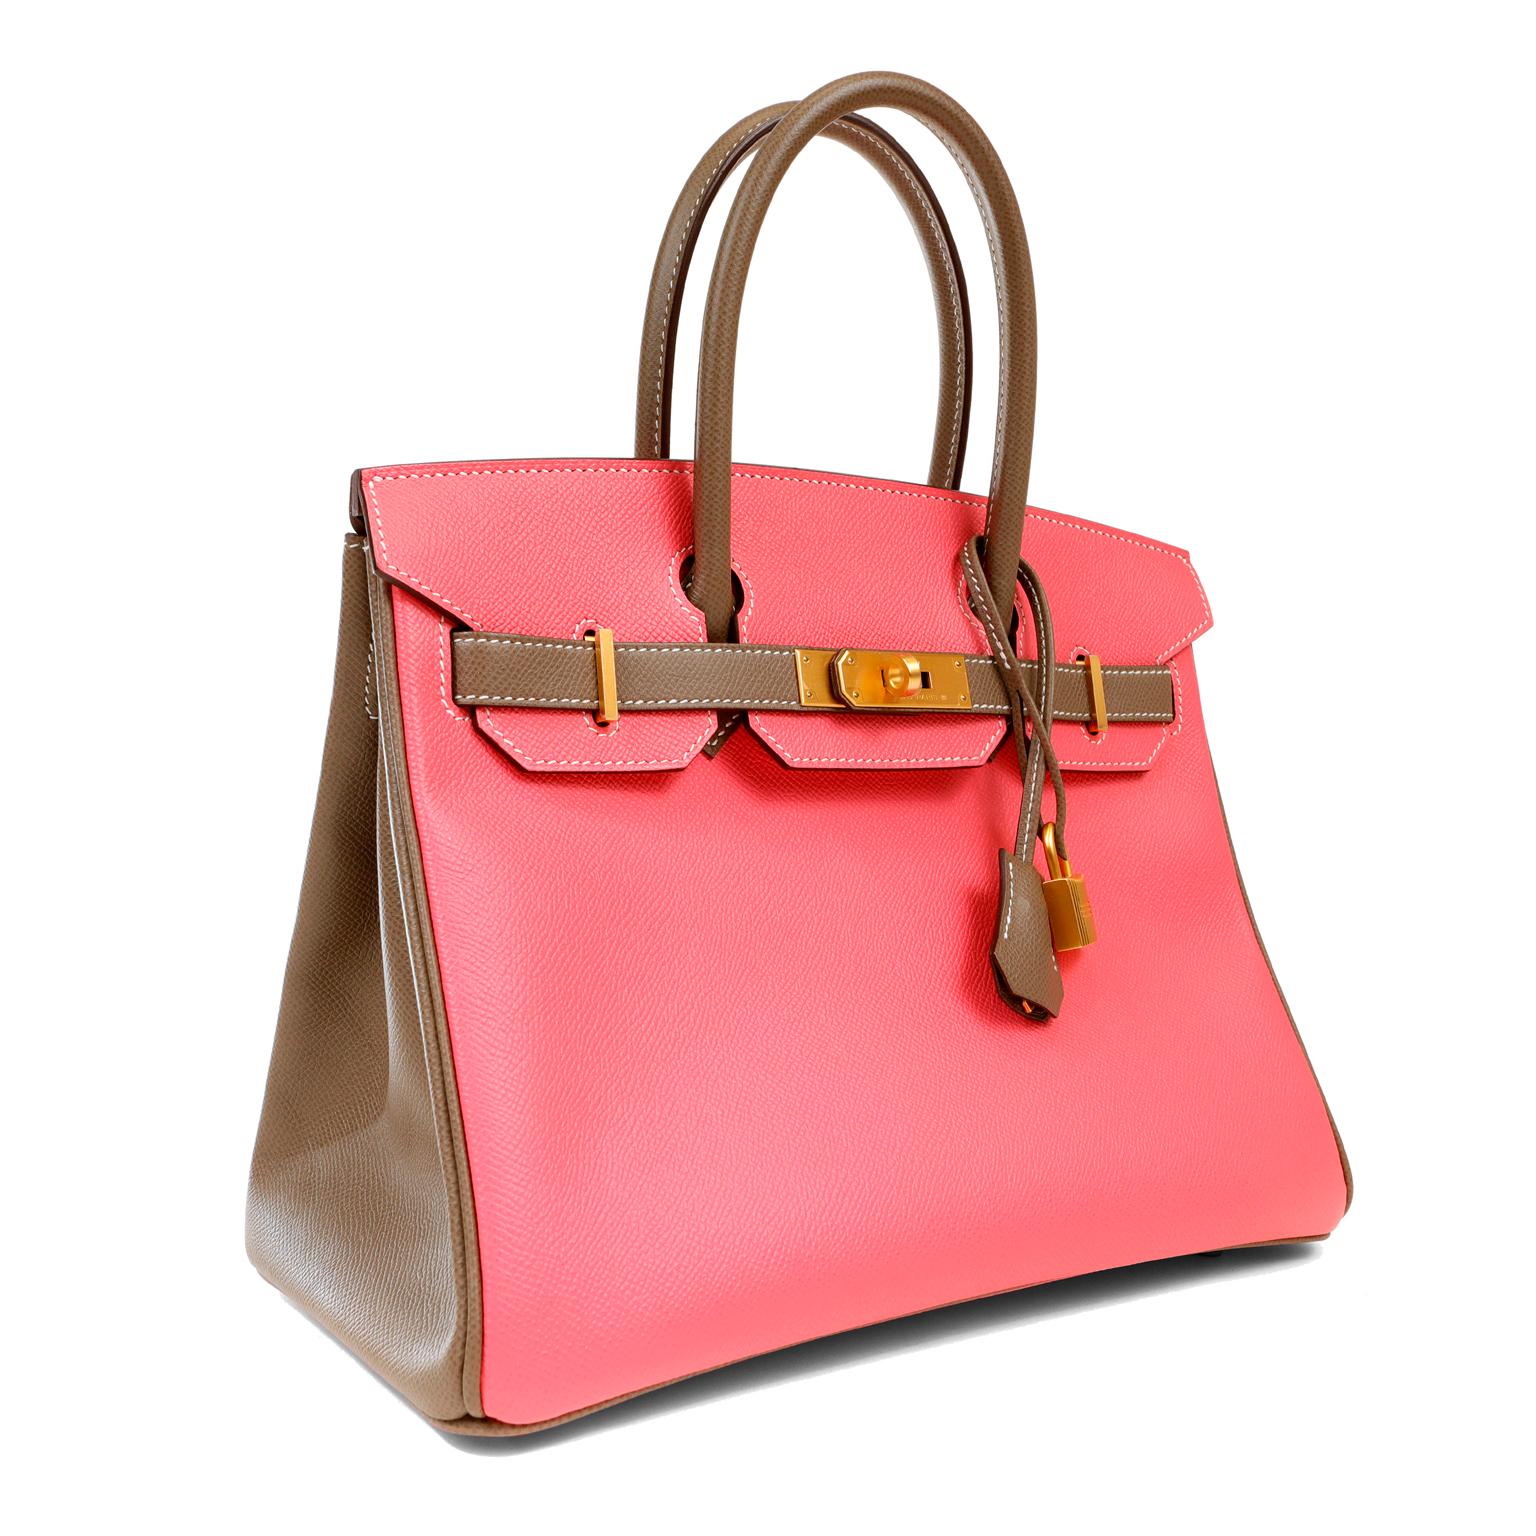 This authentic Hermès Rose and Etoupe Epsom 30 cm Horseshoe Birkin is in pristine unworn condition; the protective plastic is still intact on the hardware.    Considered the ultimate luxury item, the Hermès Birkin is stitched by hand. Waitlists